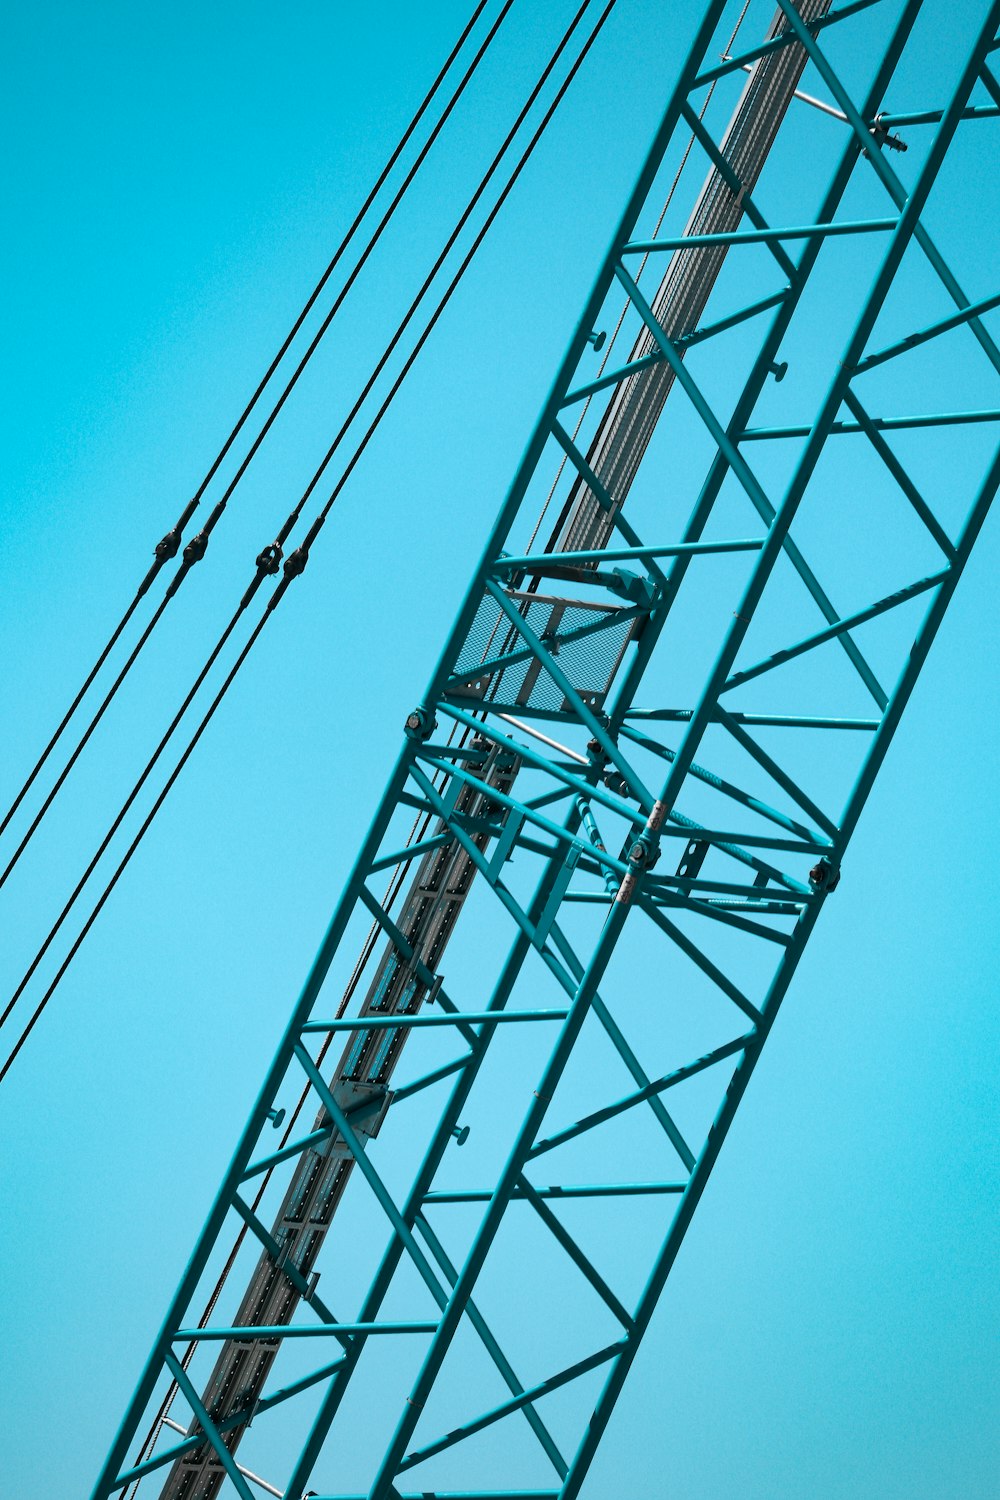 two birds sitting on a power line with a blue sky in the background